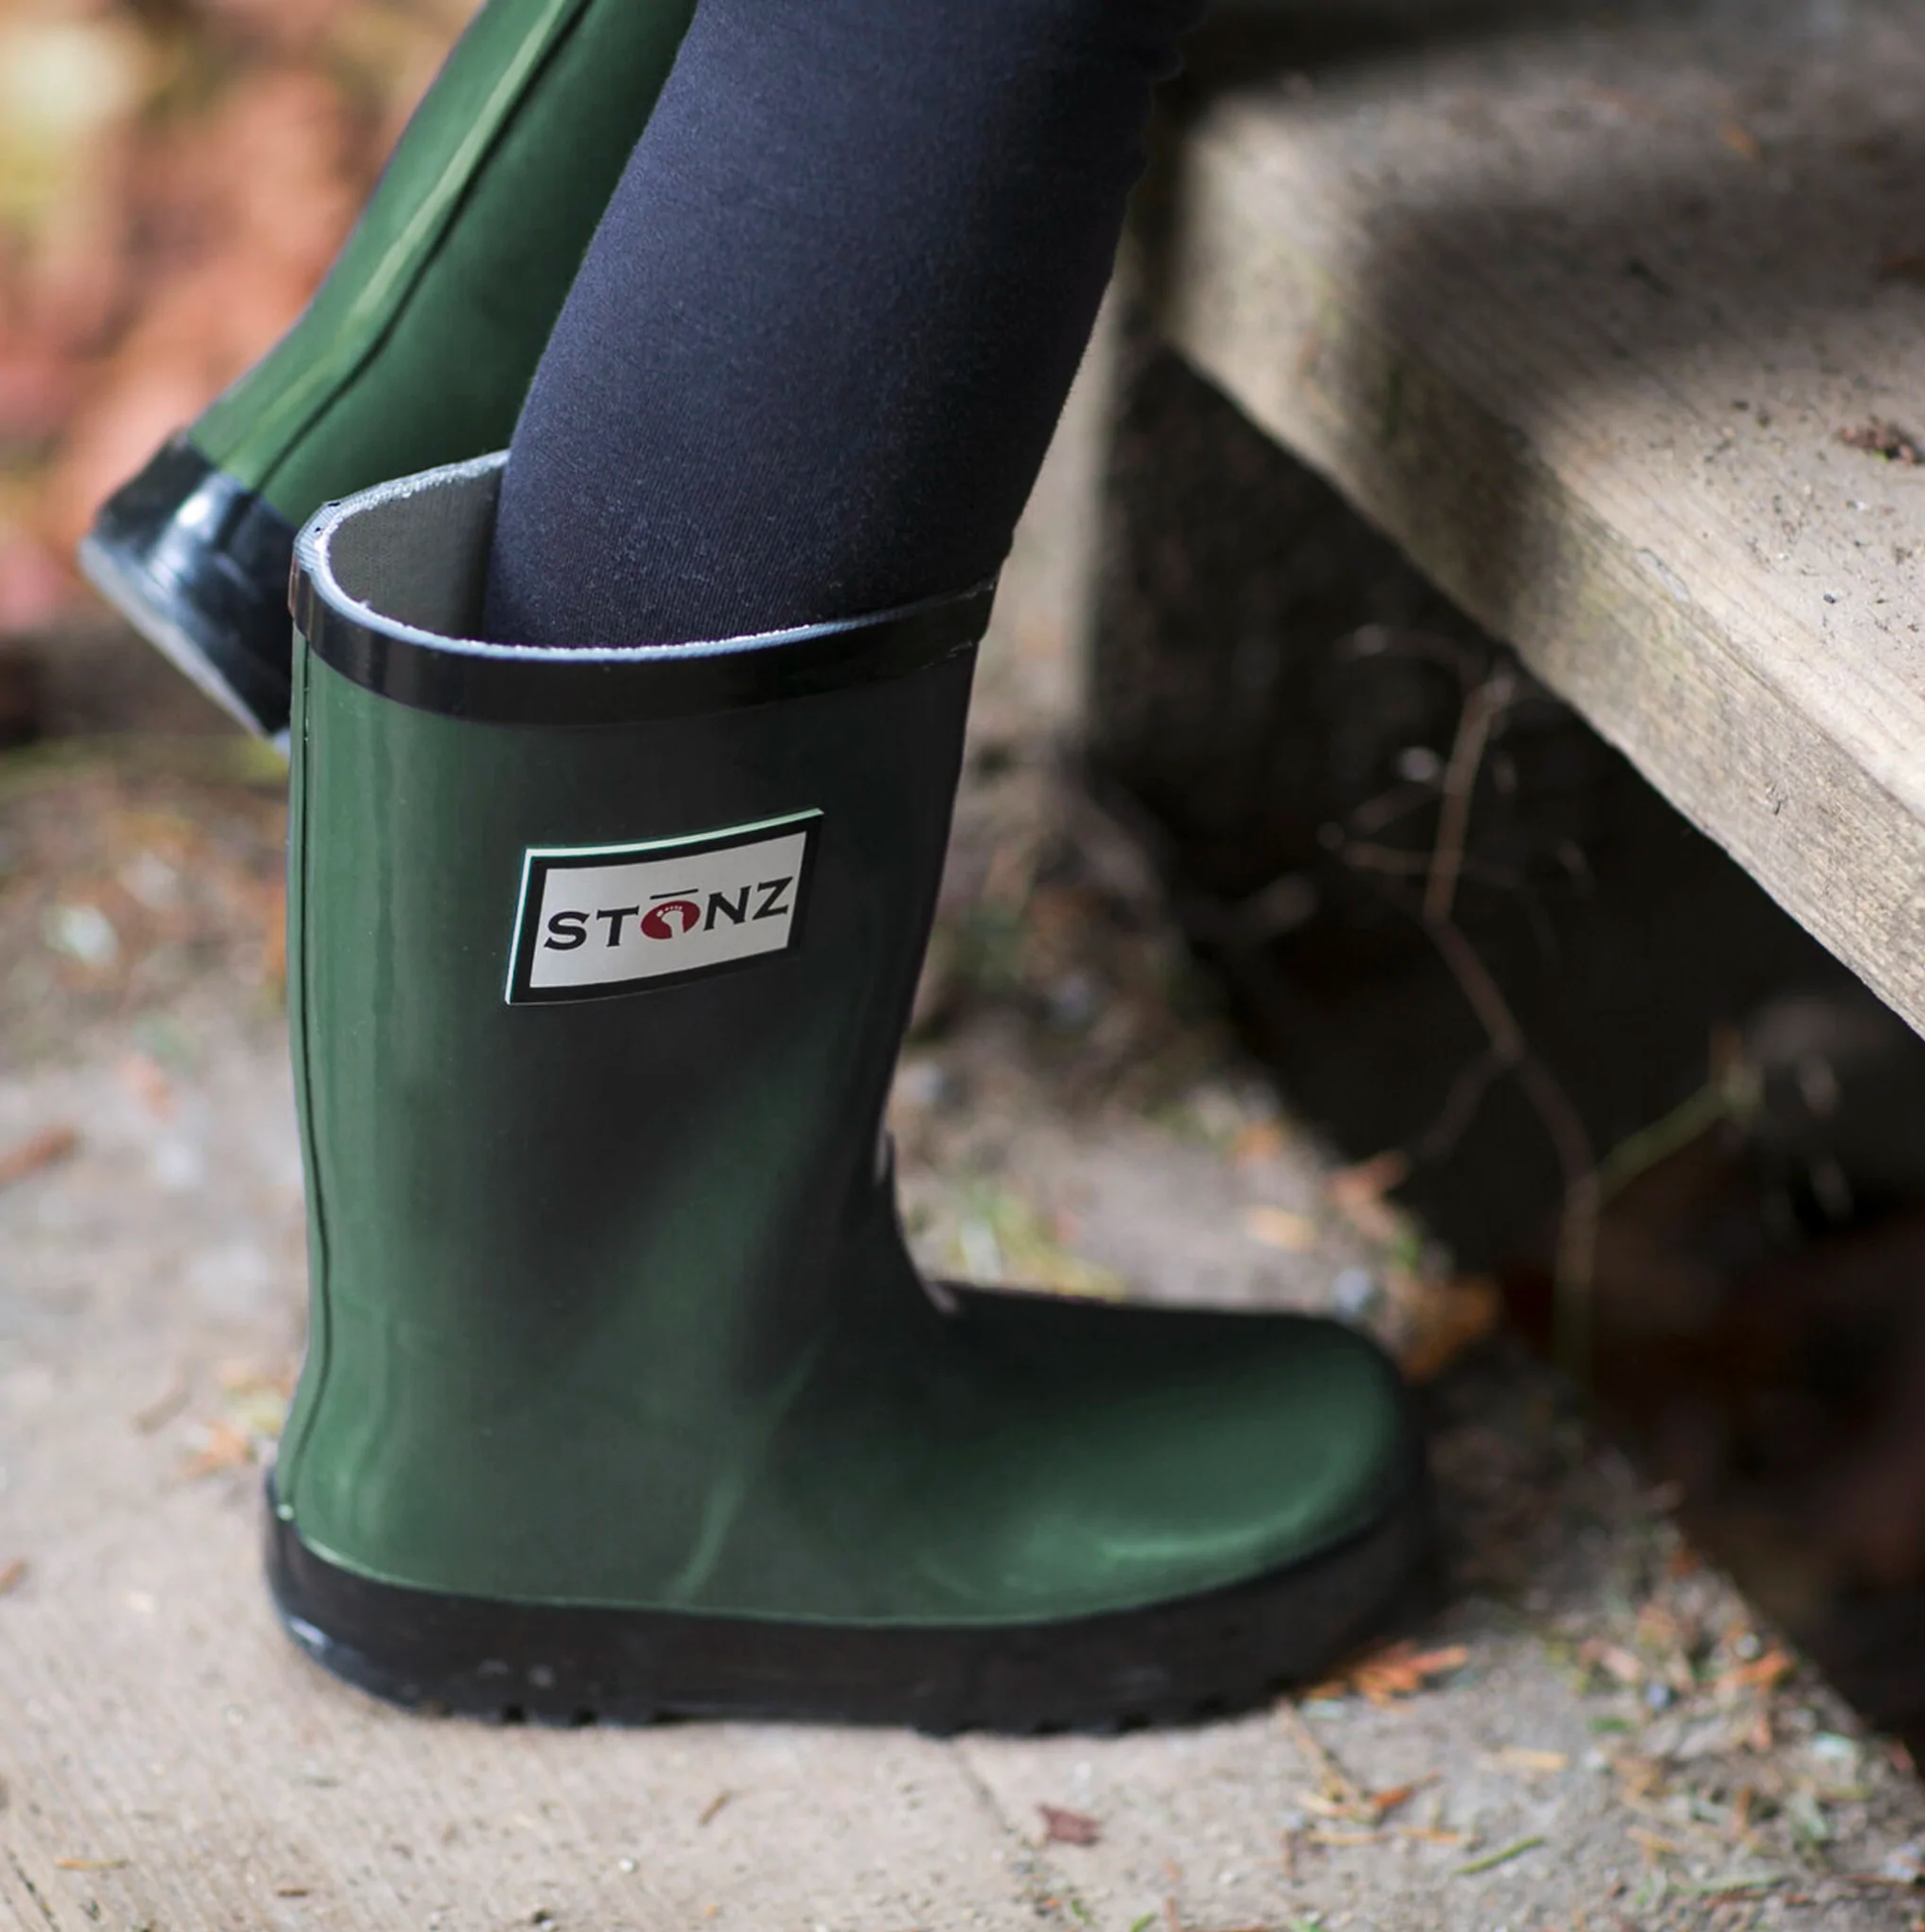 How to Choose Rain Boots - GearLab